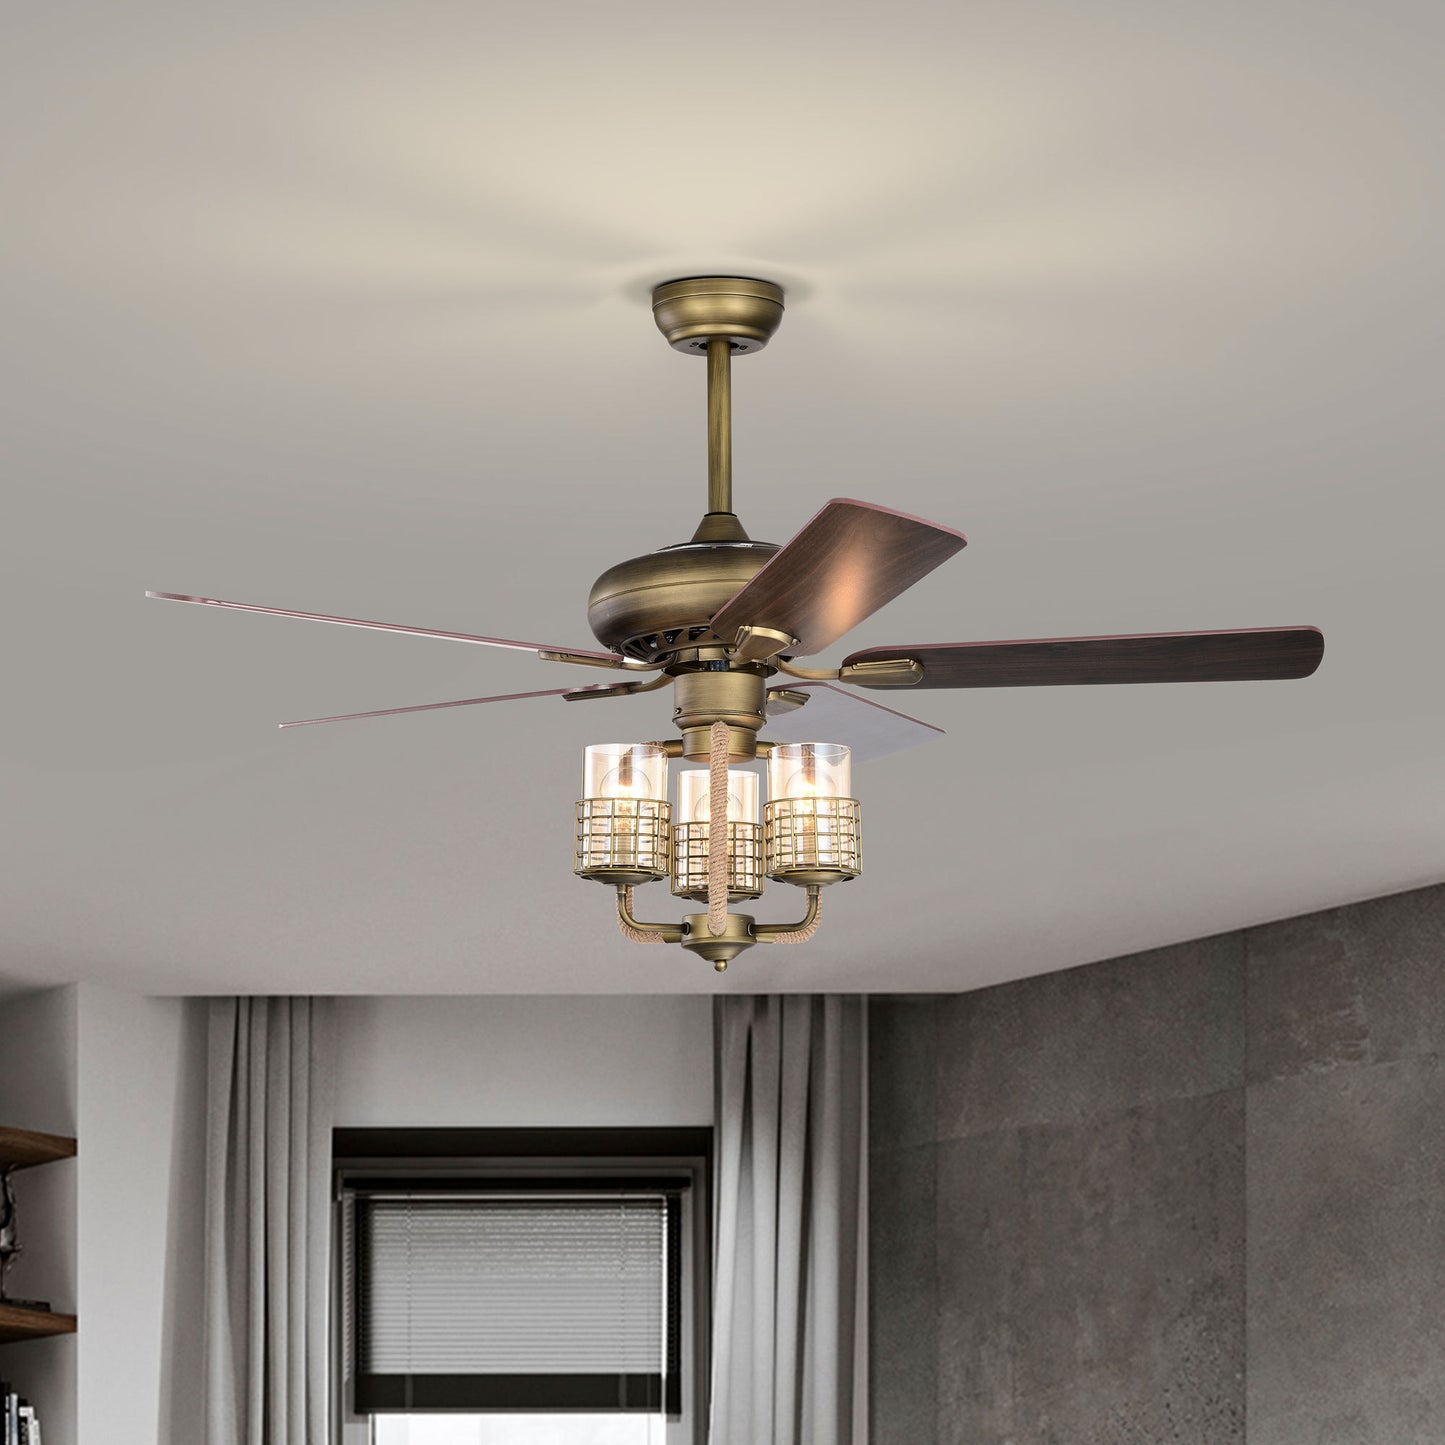 Vintage Style 52-inch Bronze Metal Ceiling Fan with Wood Blades and Remote Control